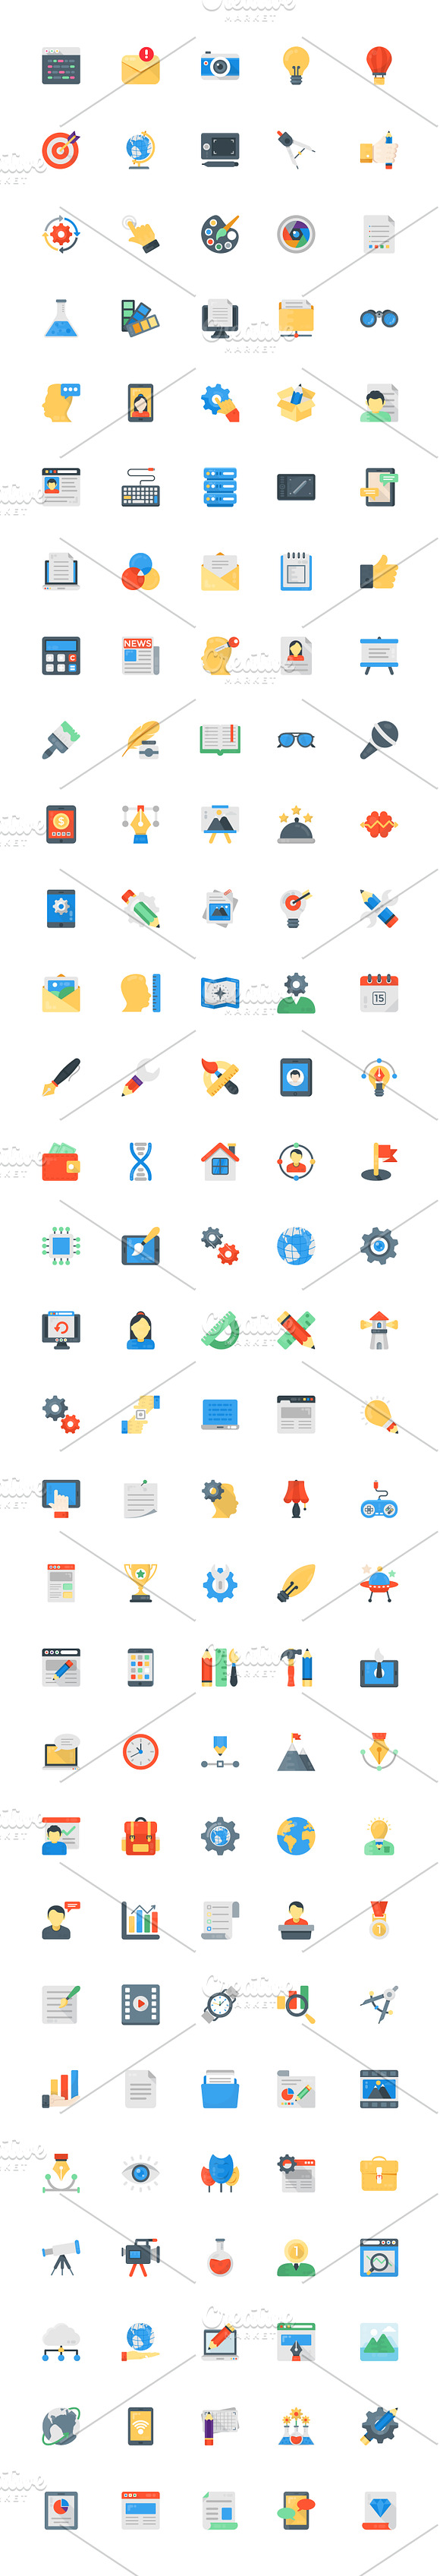 150 Creative Process Flat Icons in Icons - product preview 1